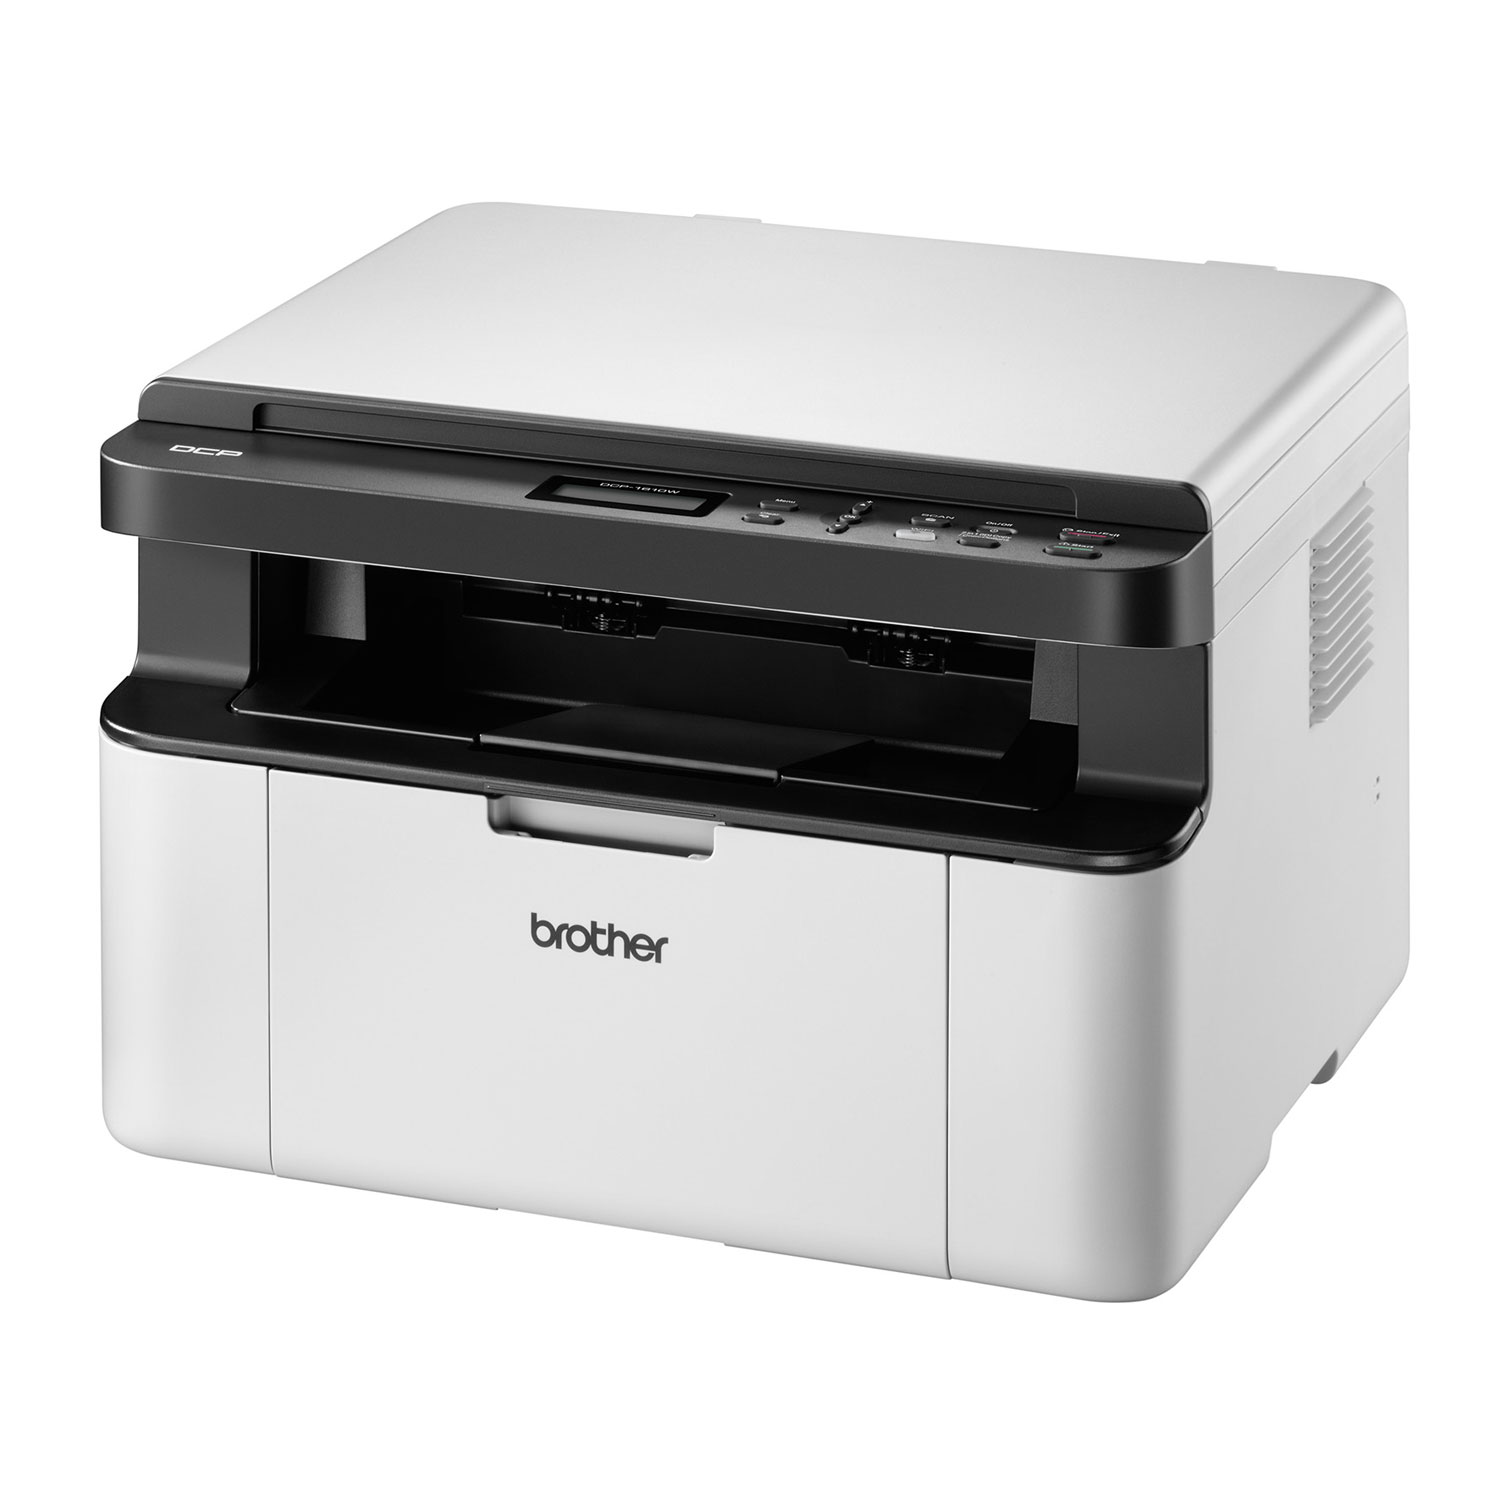 Imprimante multifonction Brother DCP-1610W - grosbill-pro.com - 1